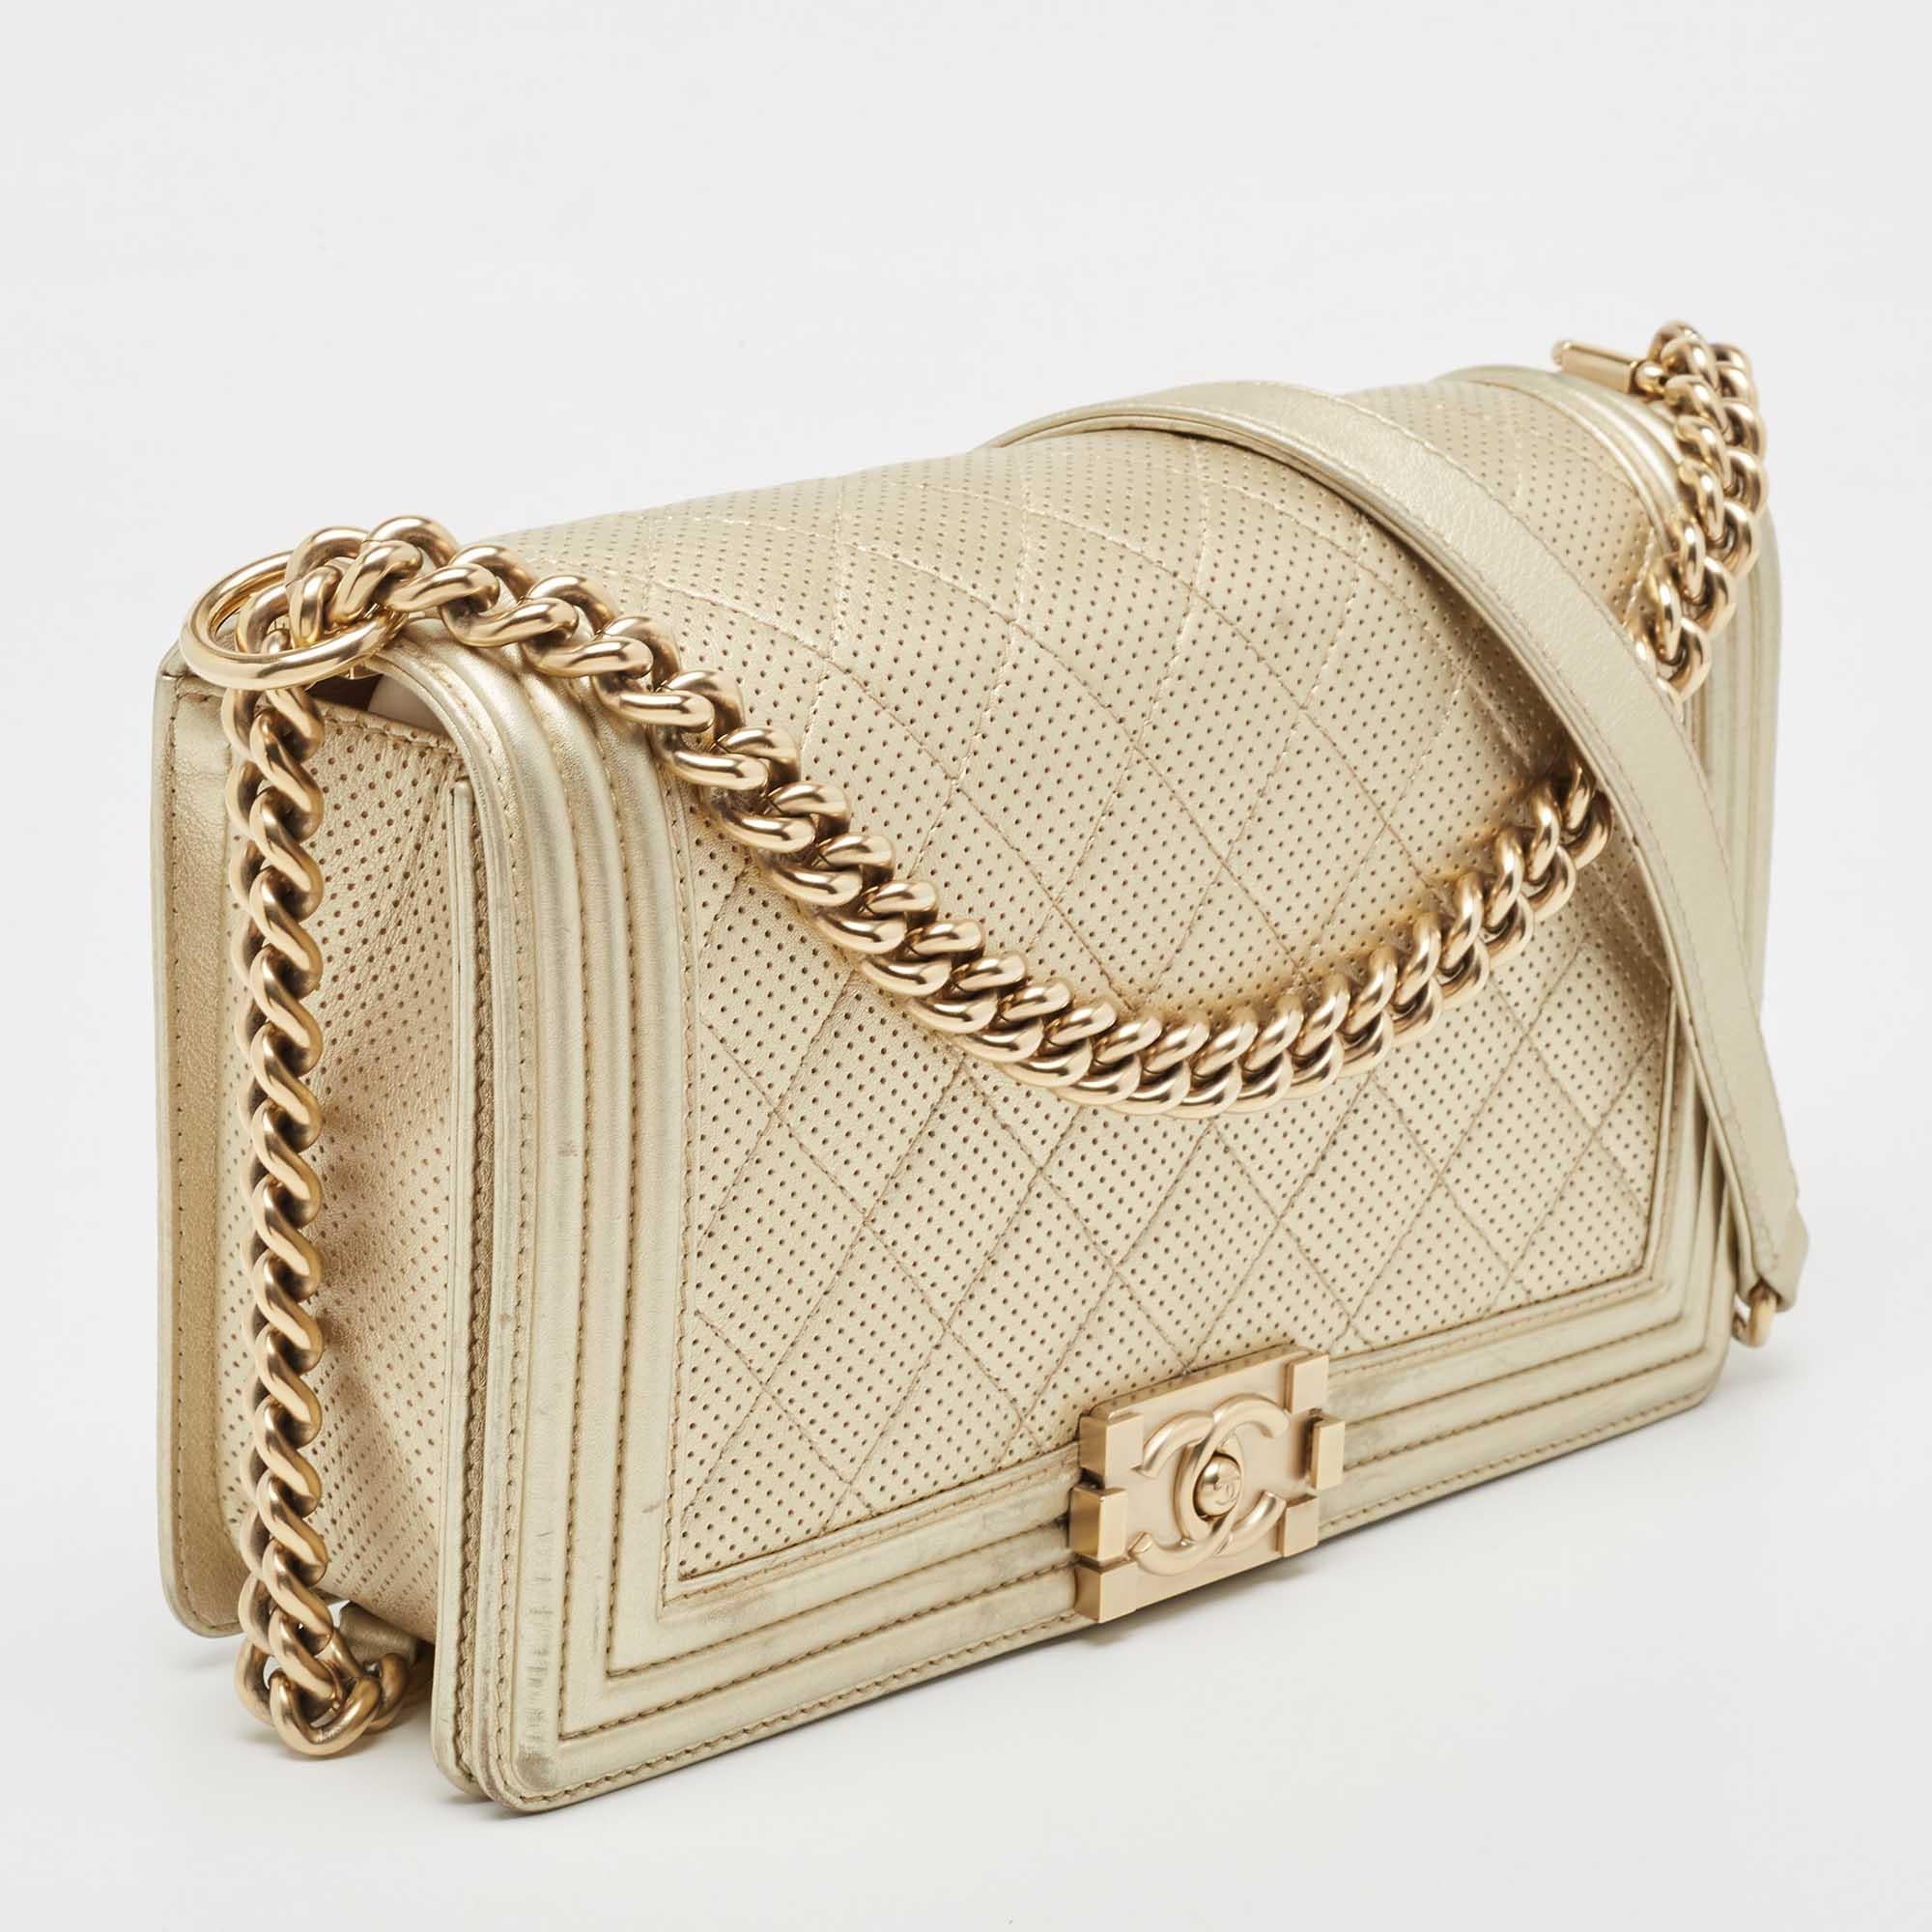 Introduced as a part of the Chanel Fall/Winter collection of 2011, the Boy flap bag embodies an alluring appeal and is complemented with exquisite details. This light gold creation is meticulously crafted from perforated leather and features side